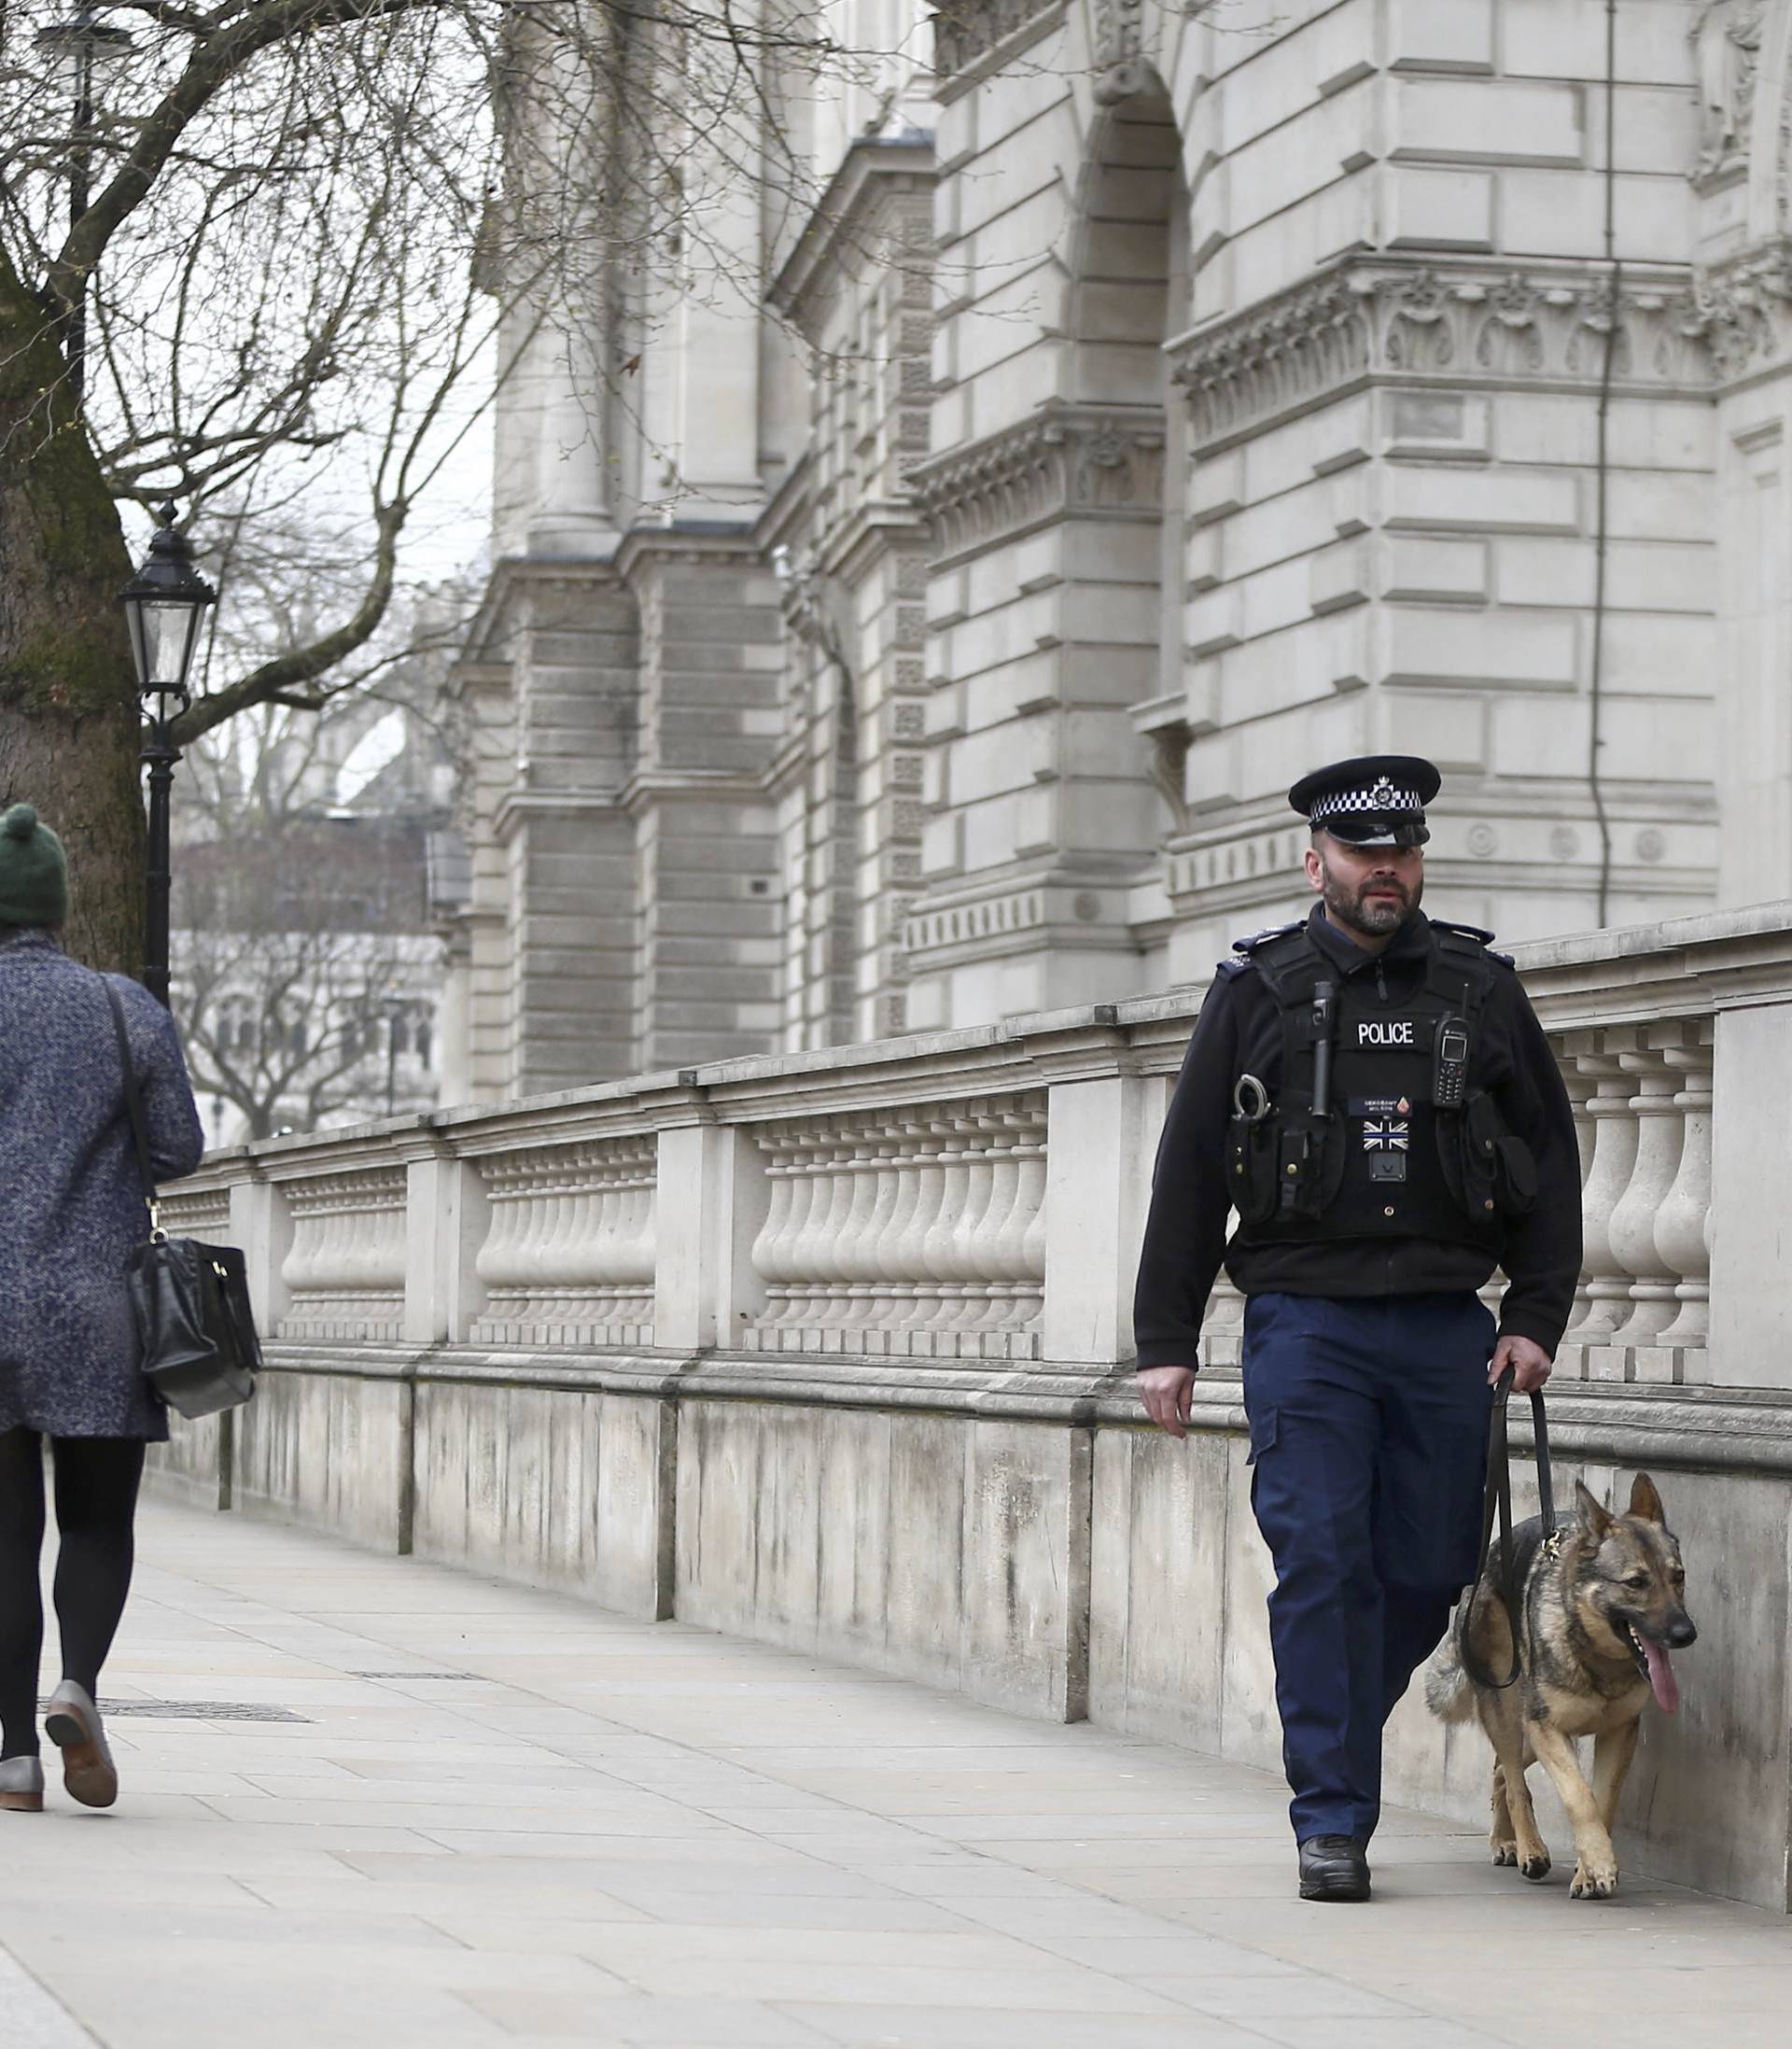 A police officer patrols Whitehall with a dog the morning after an attack in London